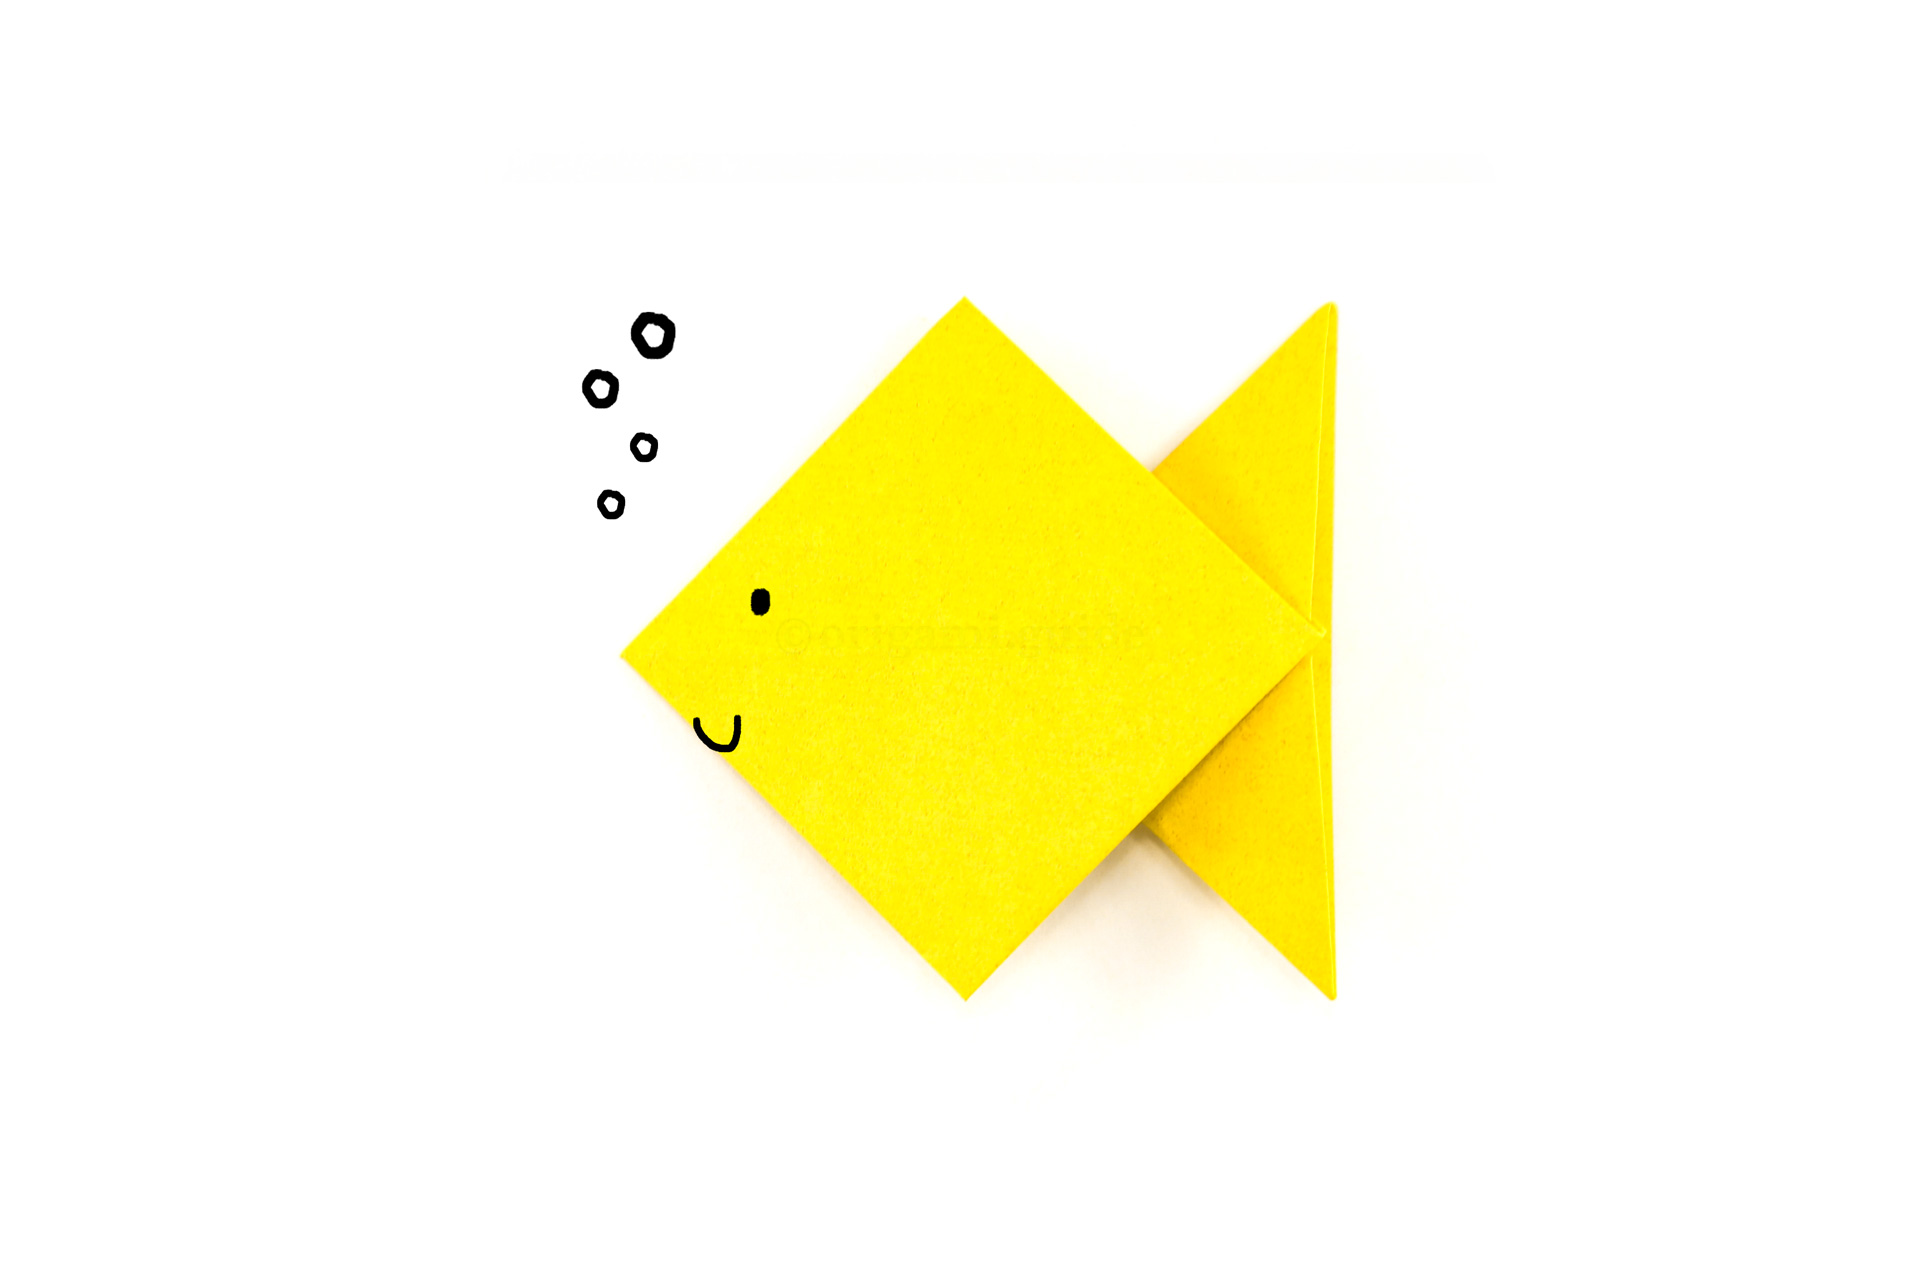 You can draw a face, fins or scales, or maybe even colourful washi tape could be used to decorate your new origami fish friend.